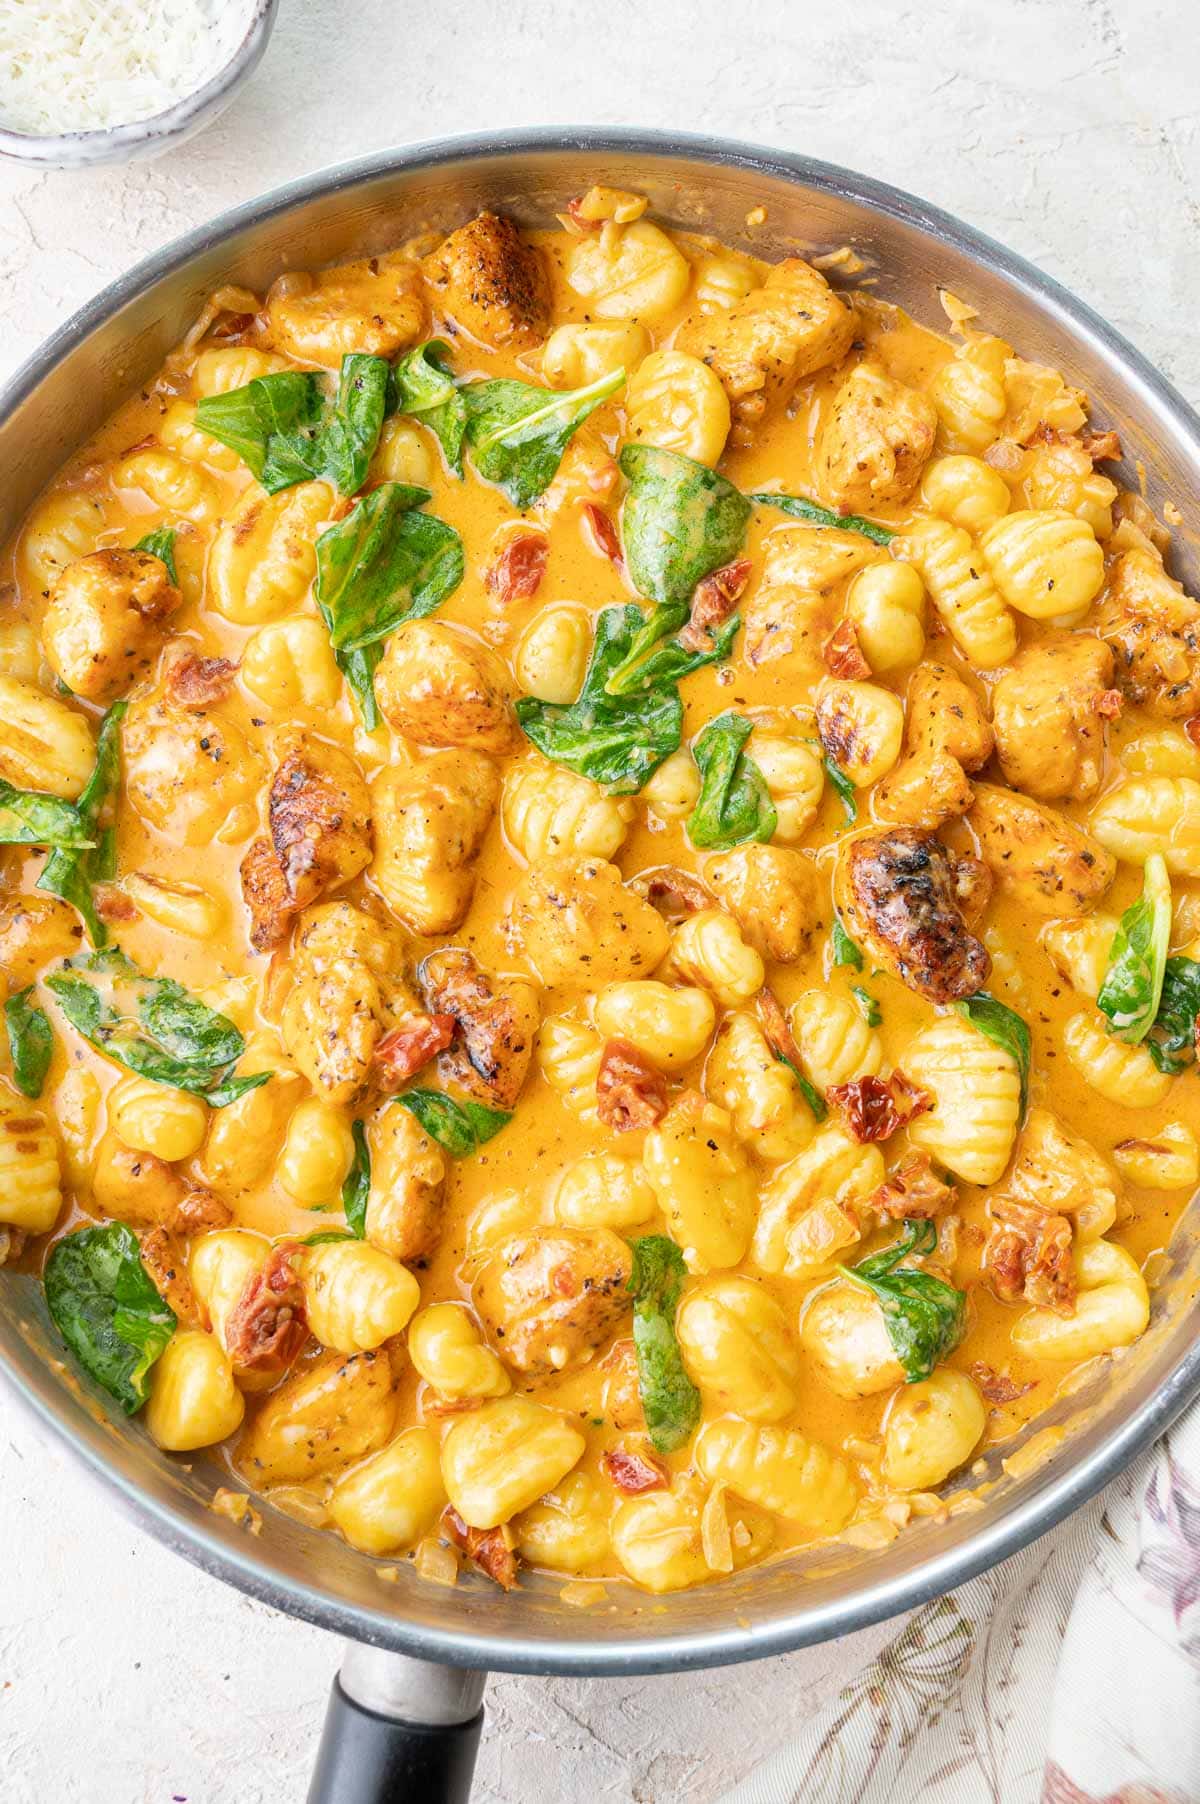 Creamy Tuscan Chicken with Gnocchi - diced chicken recipes